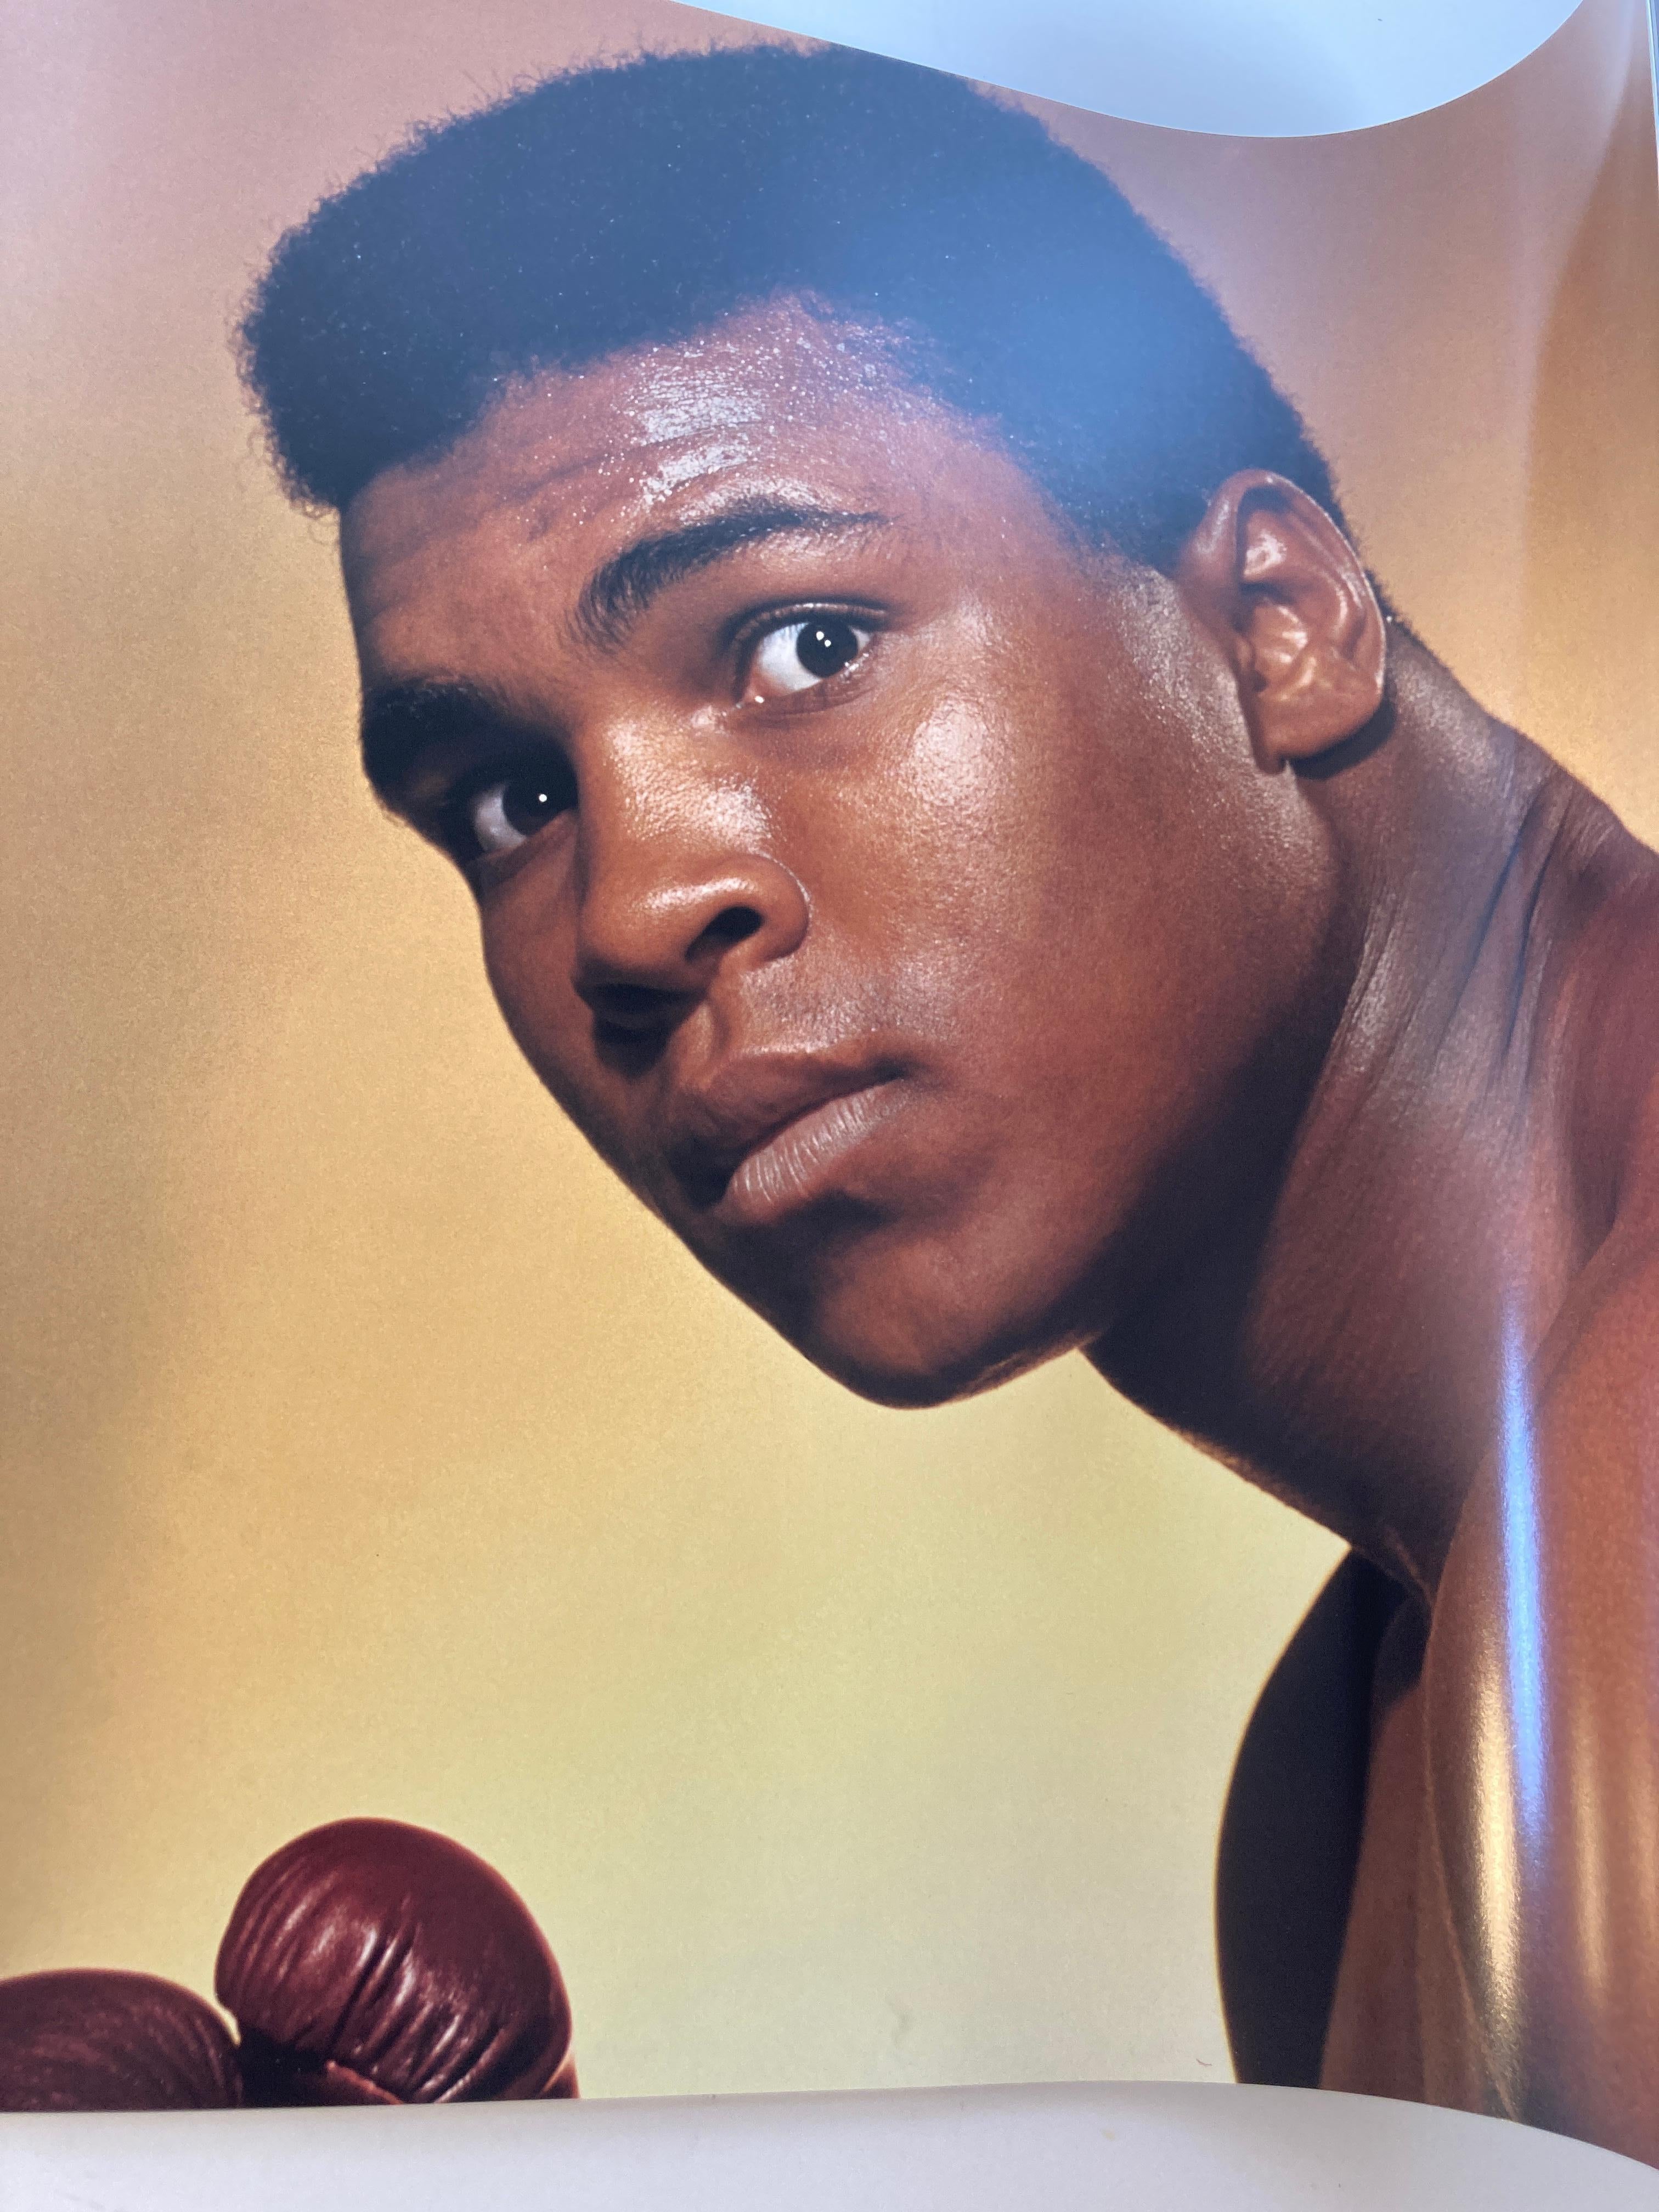 Greatest of All Time (GOAT) a Tribute to Muhammad Ali. 
Muhammad Ali Greatest of All Time Promotional Limited Edition: TASCHEN Promotional book in a tube. 
The publisher prospectus Folio Version.
Paperback – January 1, 2004
by Editor (ALI,